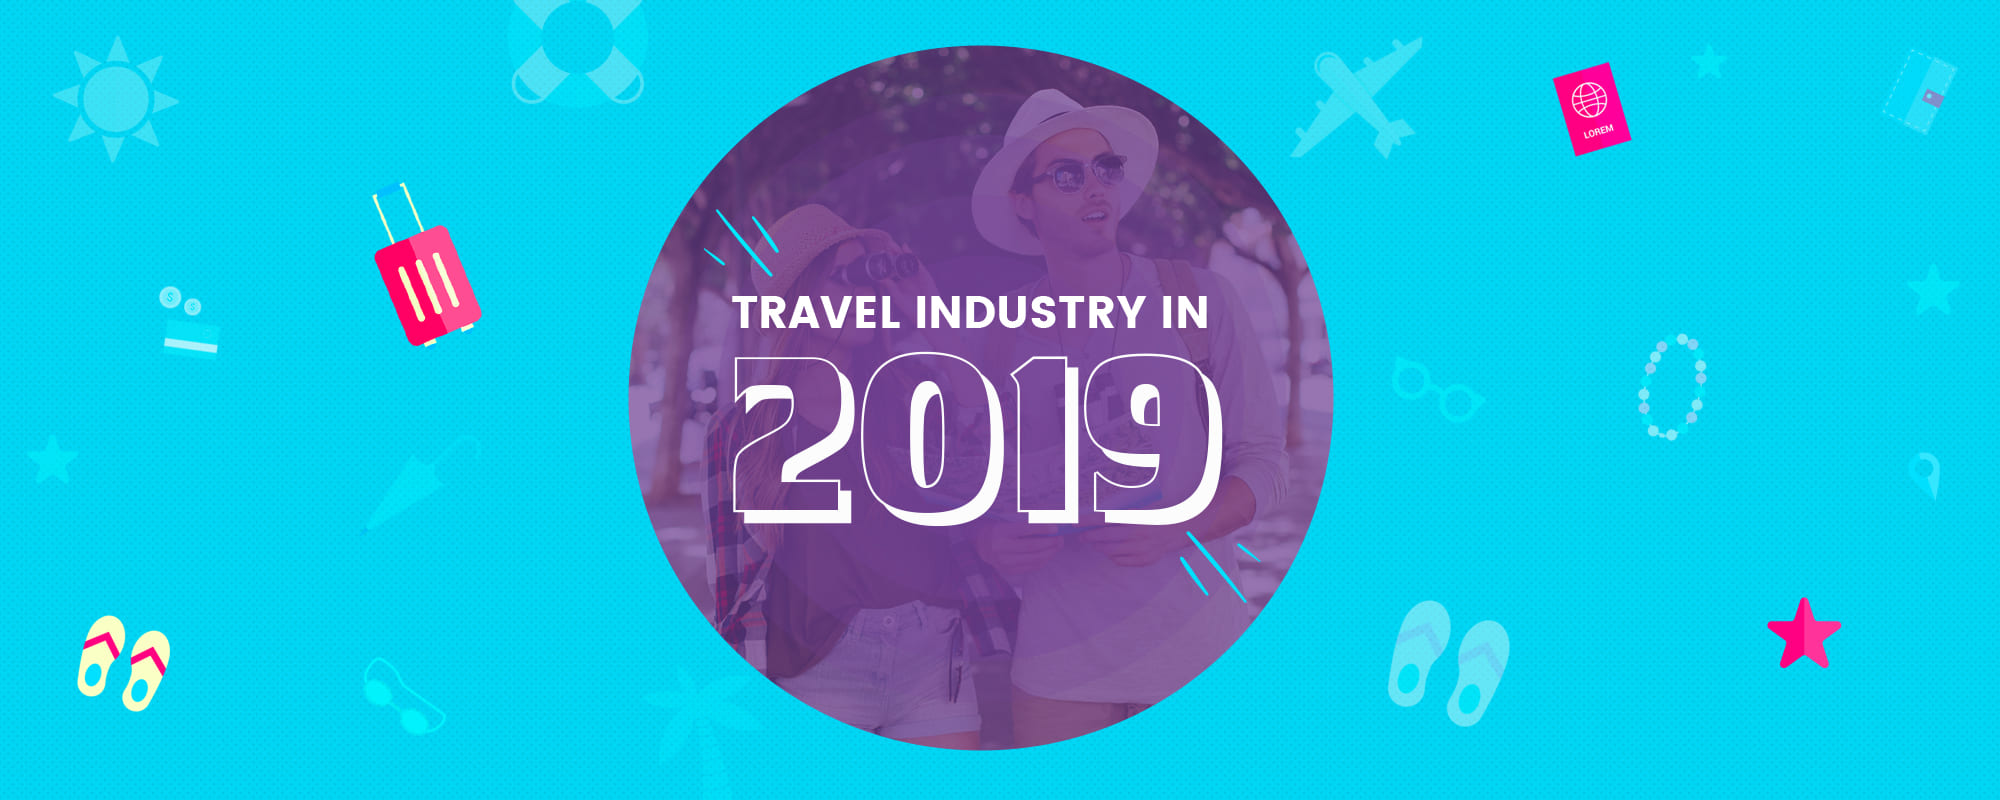 What Does The Future Hold For Travel Industry In 2019?